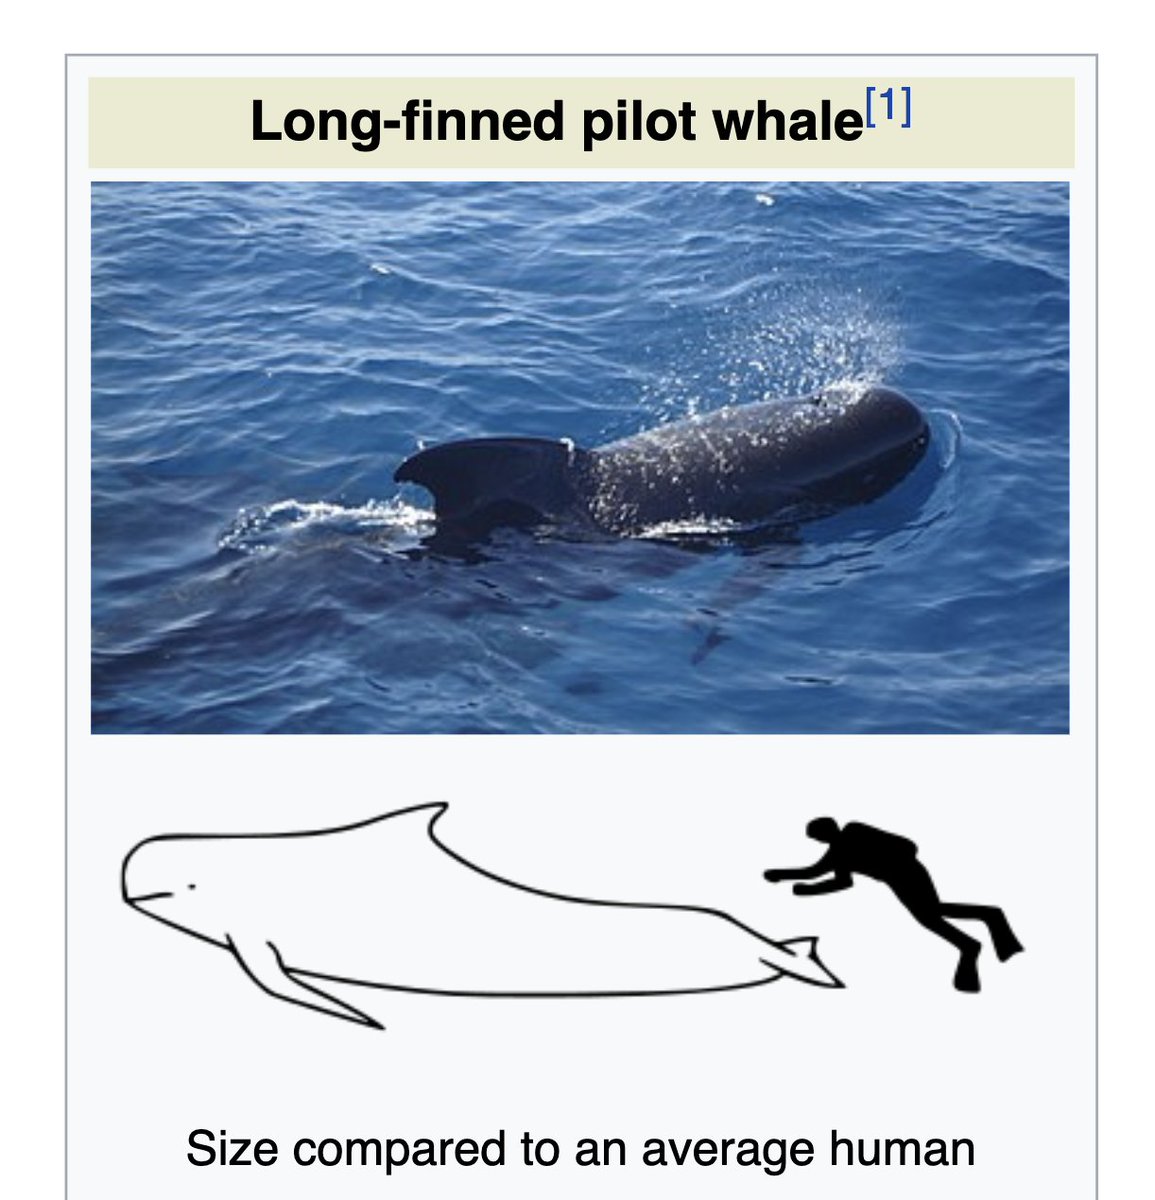 I have always loved that Wikipedia has these cute line drawings for hundreds of marine mammals. Today I learned they were all uploaded by the same person!!